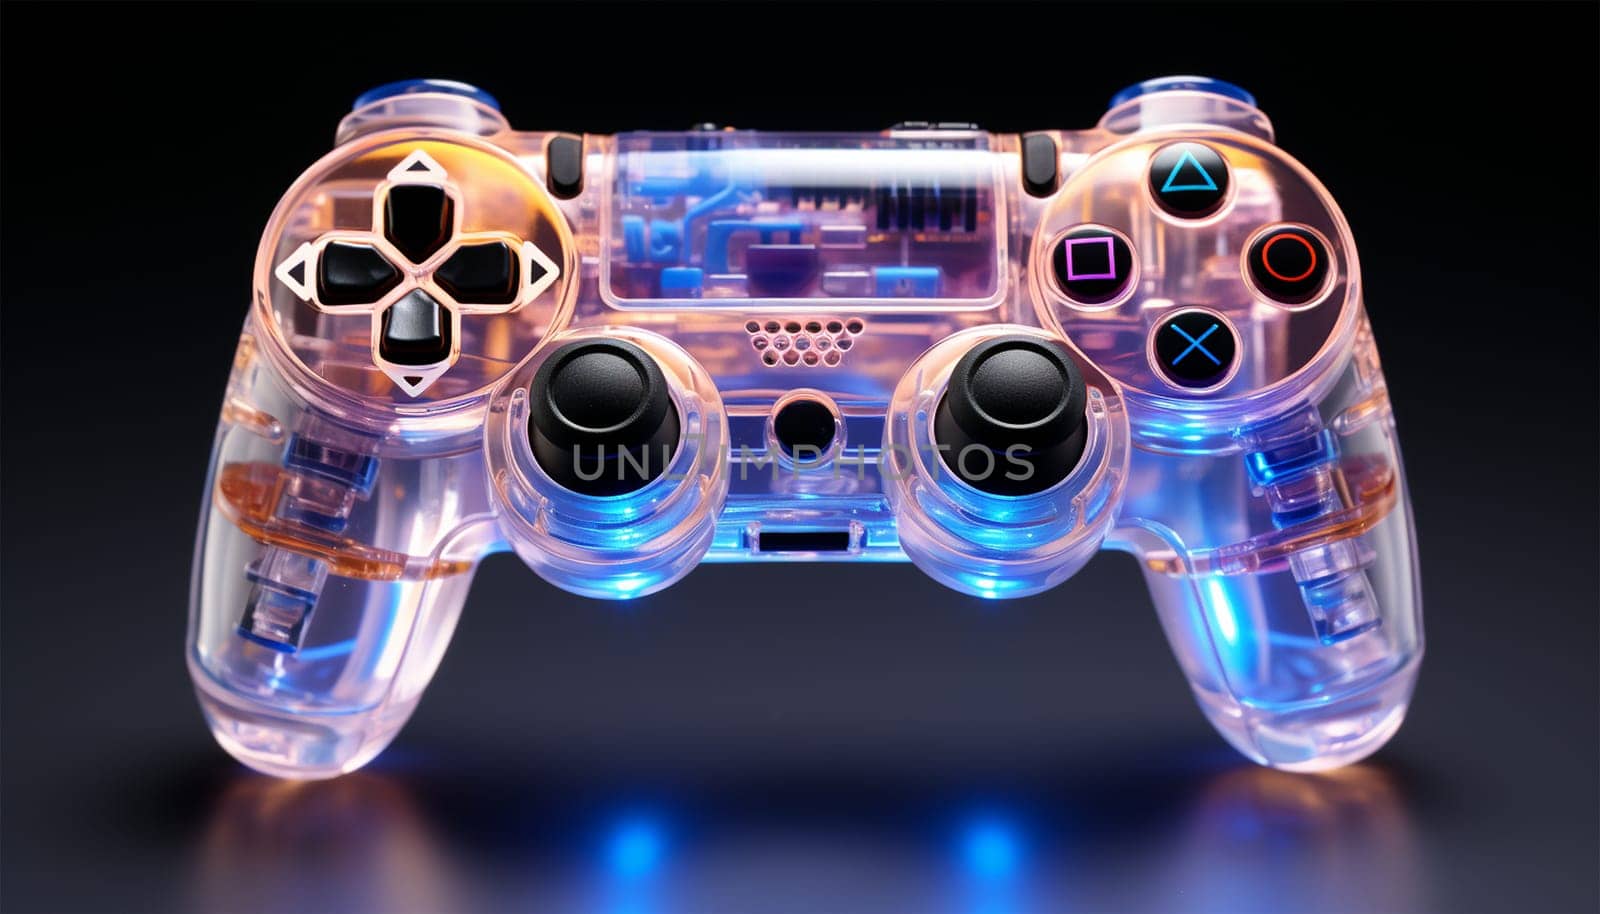 Neon game consol transparent. Purple,blue,pink glowing console controller or joystick with a cool neon background with space theme. best for retro gaming posters or promotional content for gaming tournaments etc. Colorful space themed cover. Copy space by Annebel146